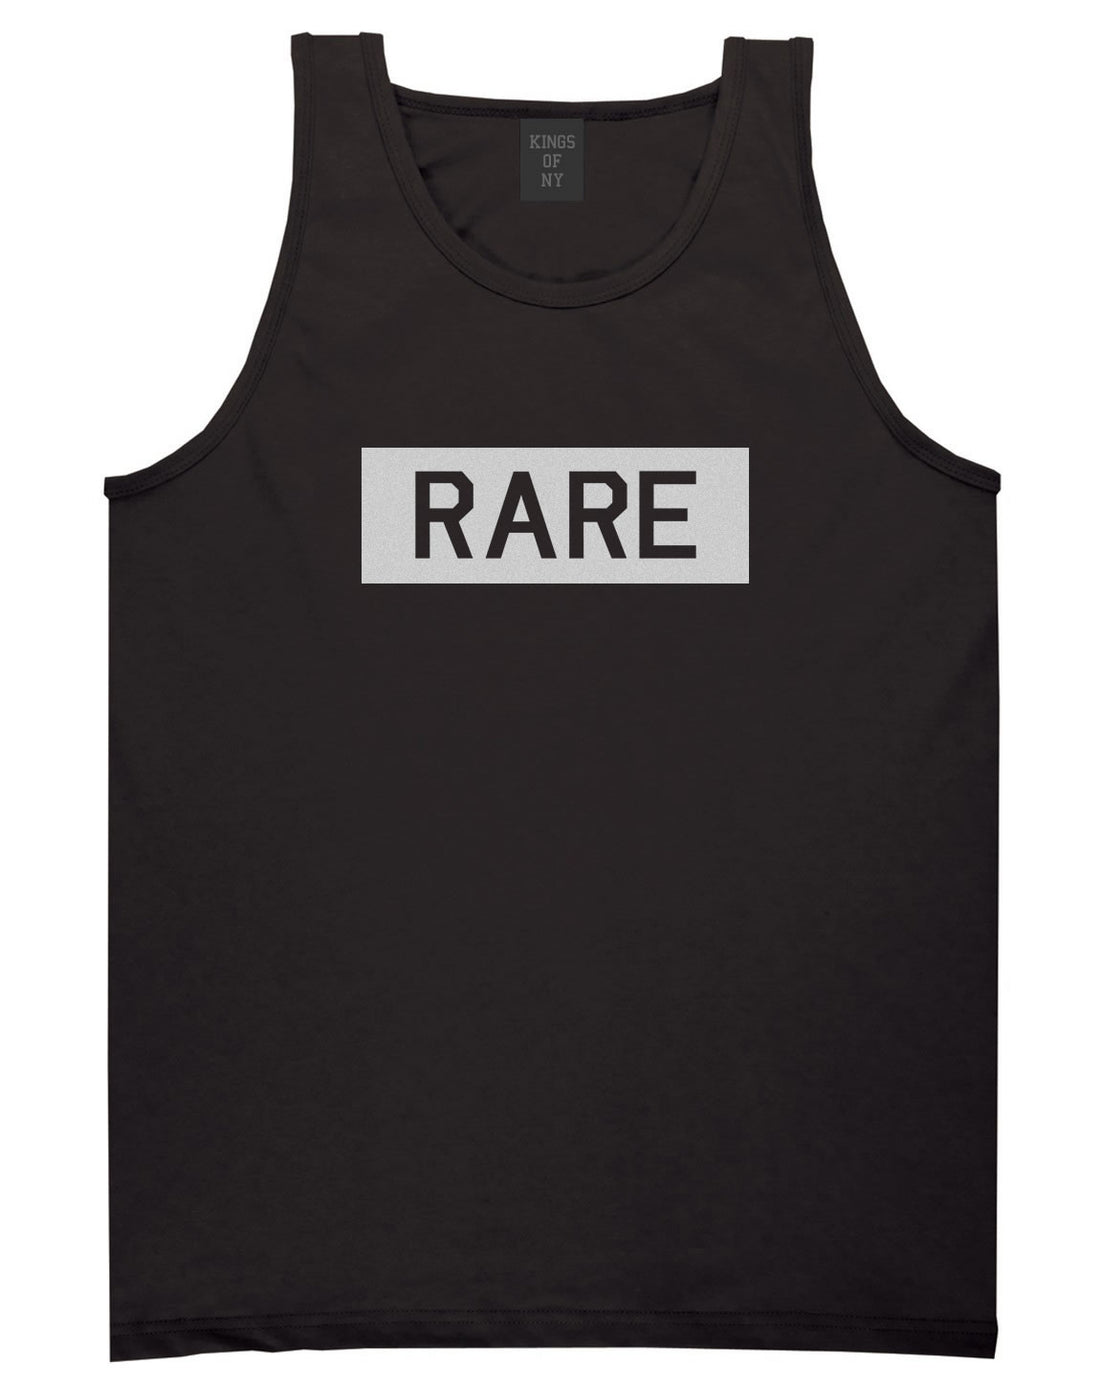 Rare College Block Tank Top in Black by Kings Of NY